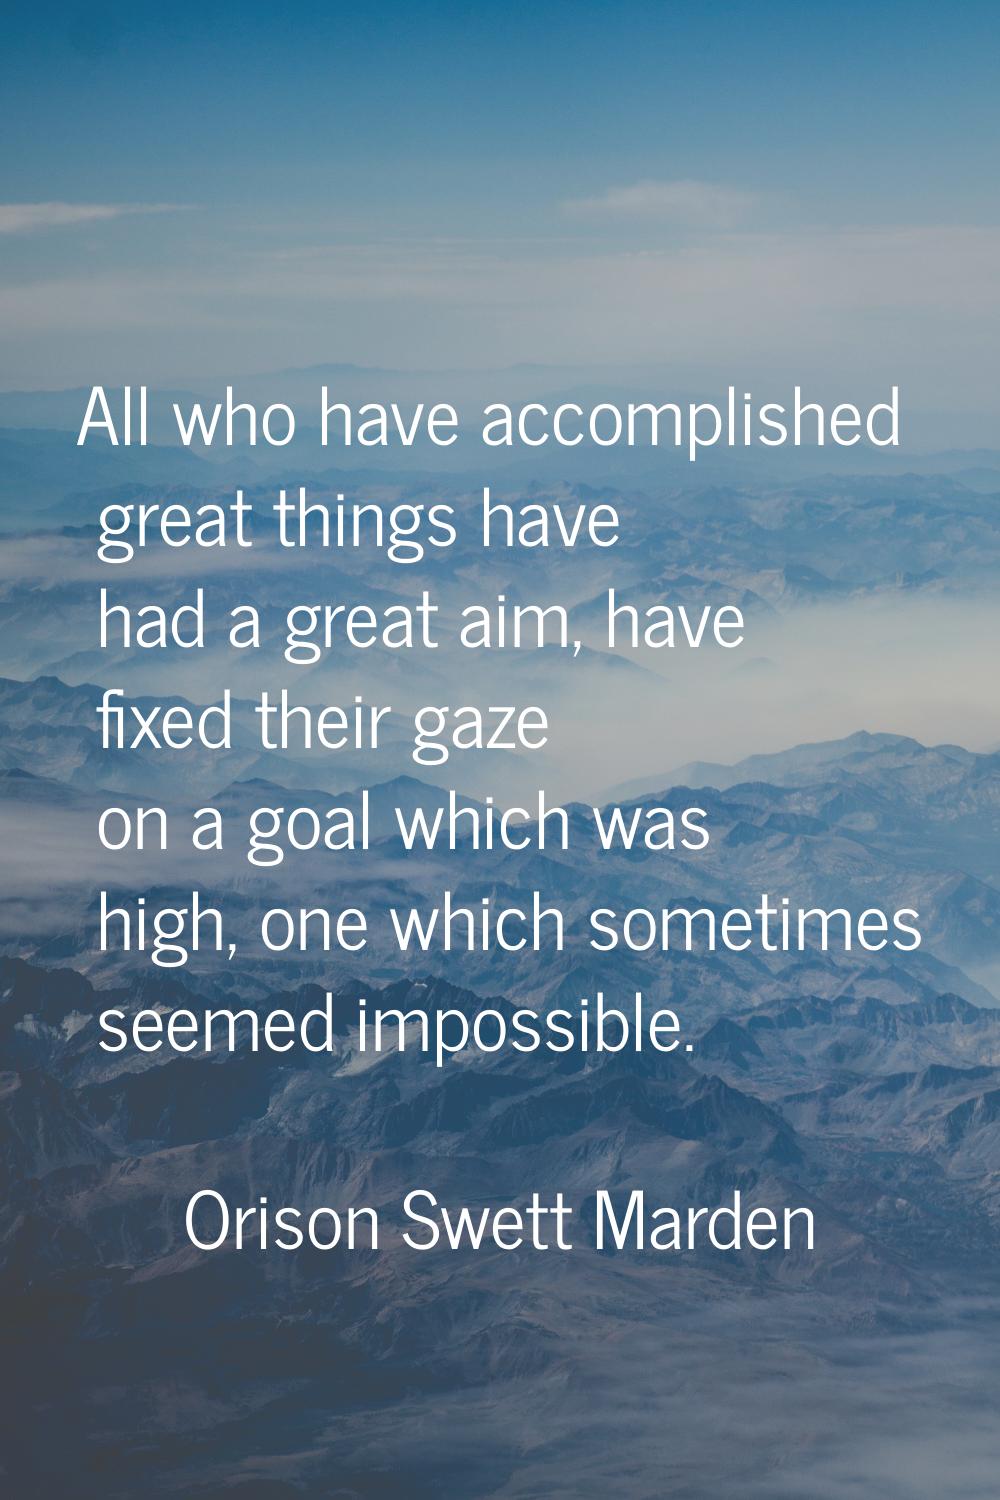 All who have accomplished great things have had a great aim, have fixed their gaze on a goal which 